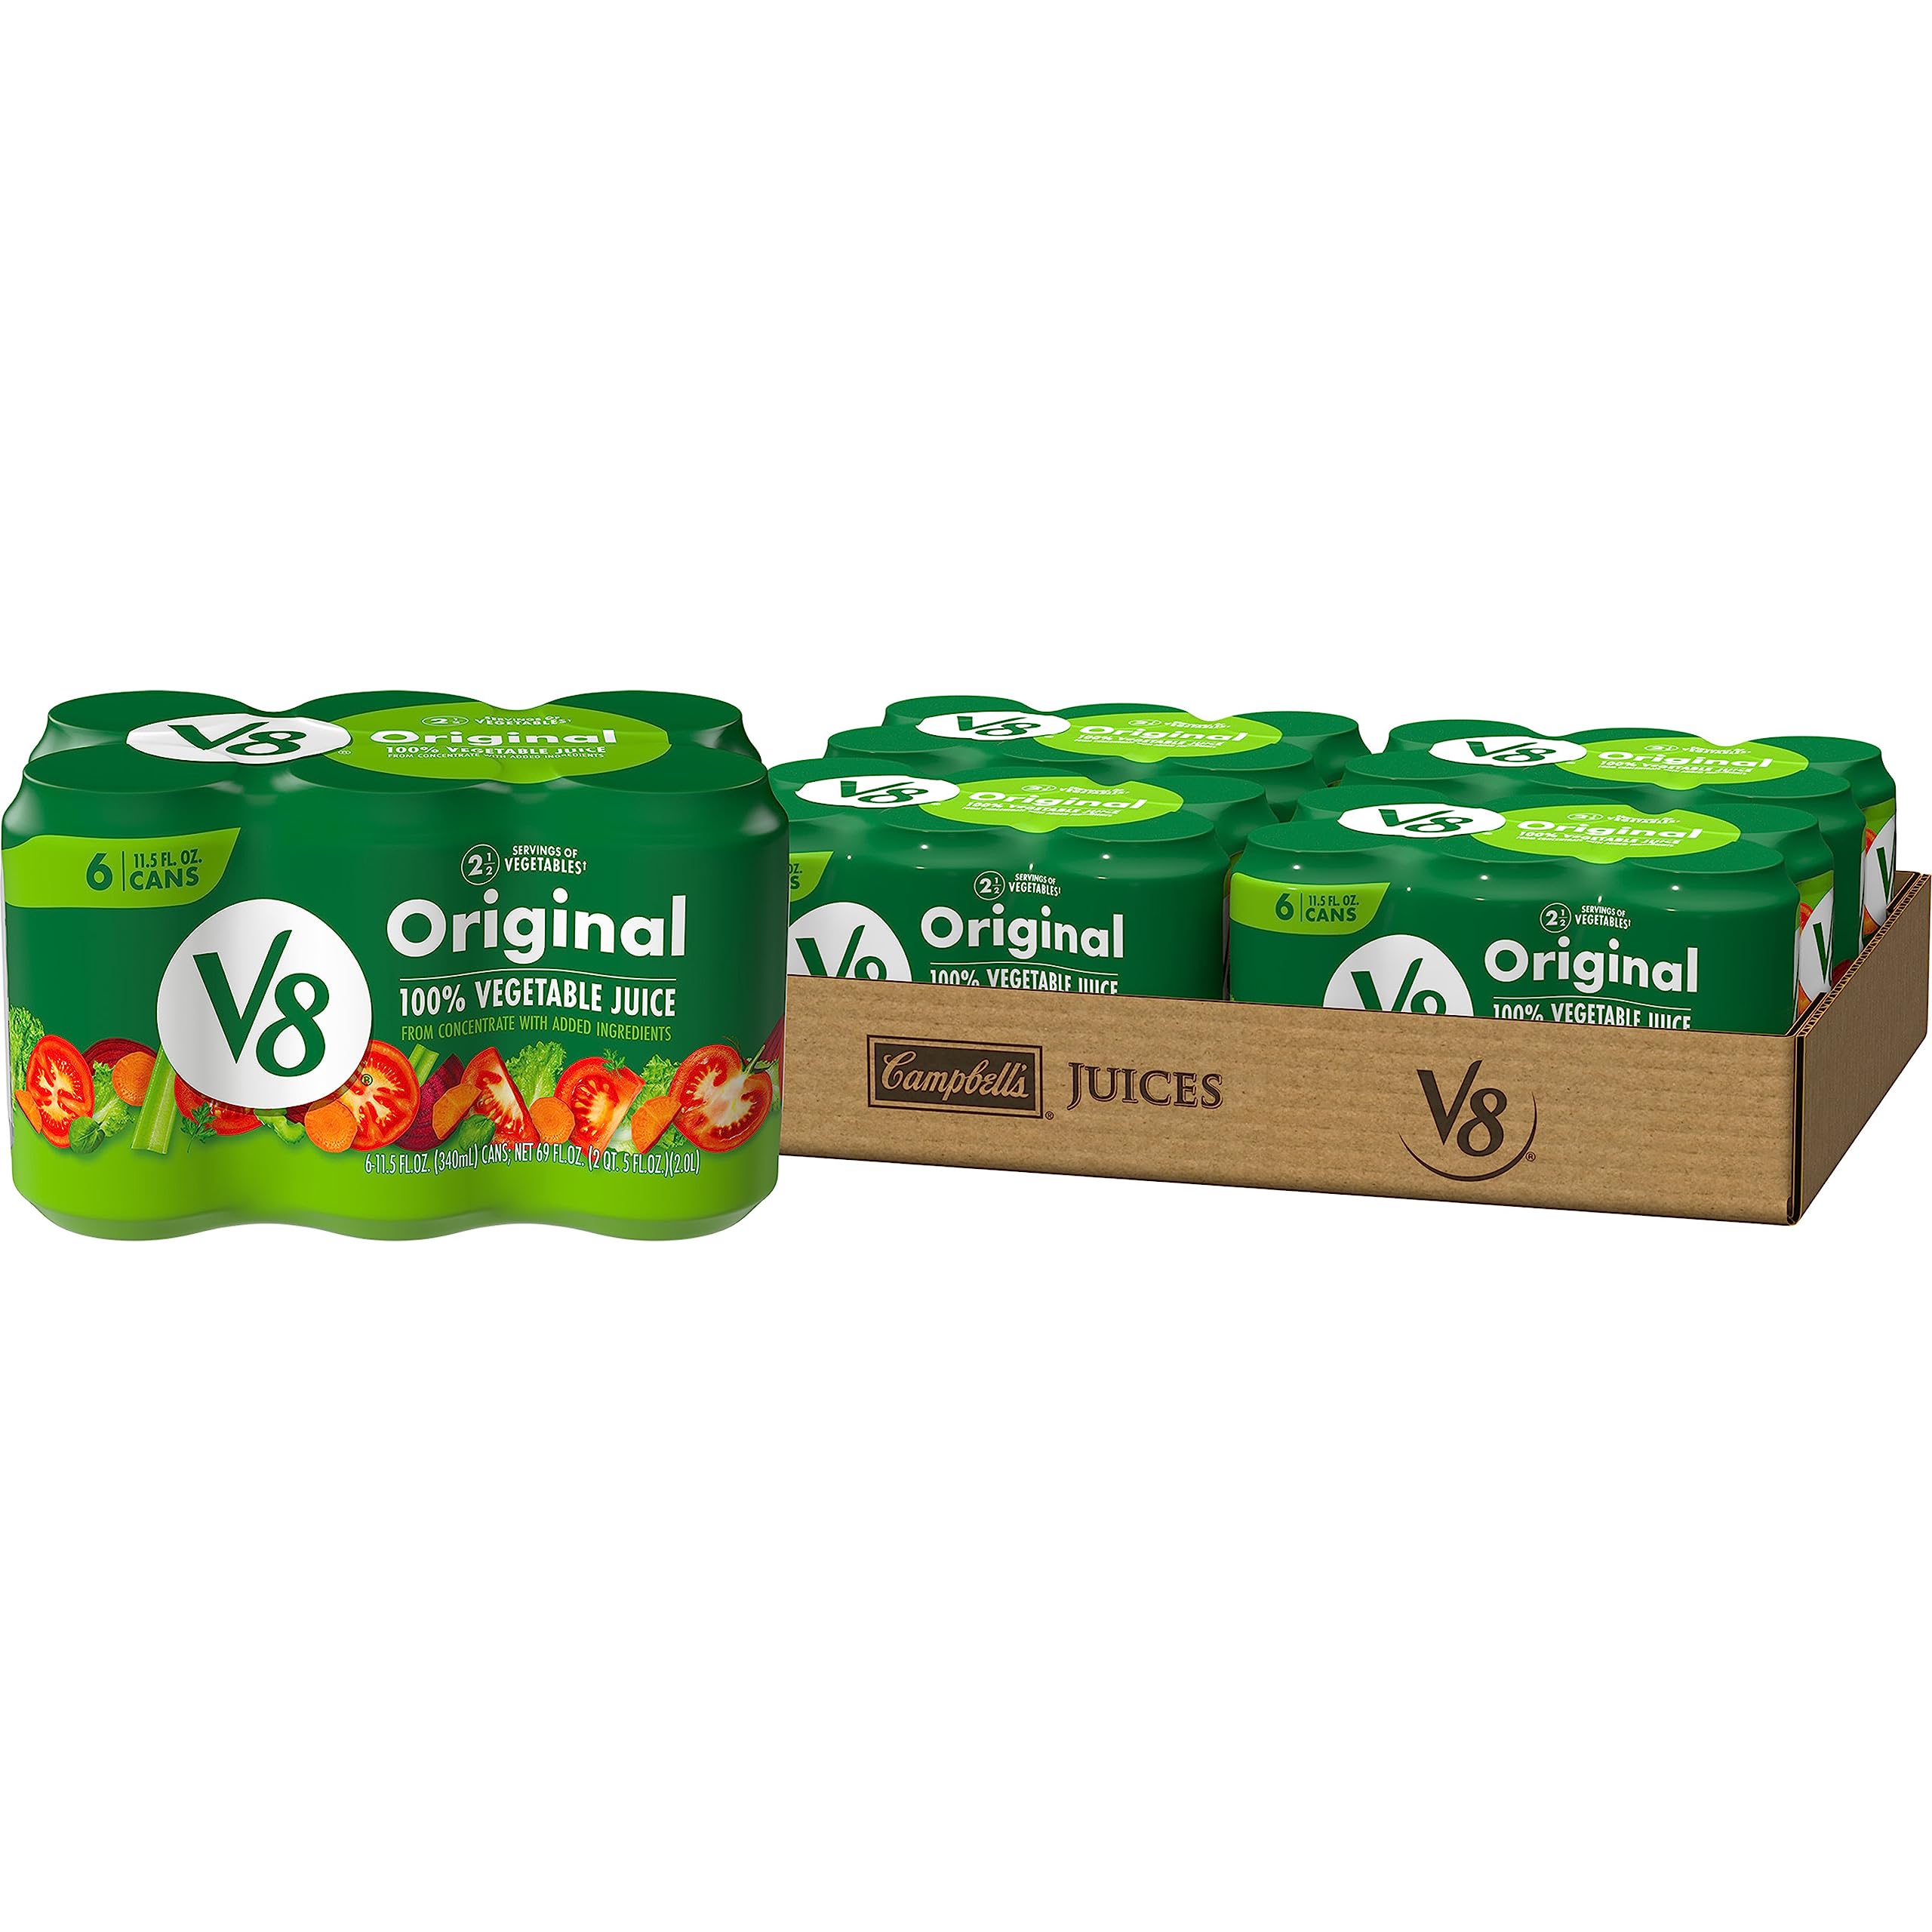 24-Pack 11.5-Oz V8 100% Vegetable Juice Cans (Original) $10.96 w/ S&S + Free Shipping w/ Prime or on $35+